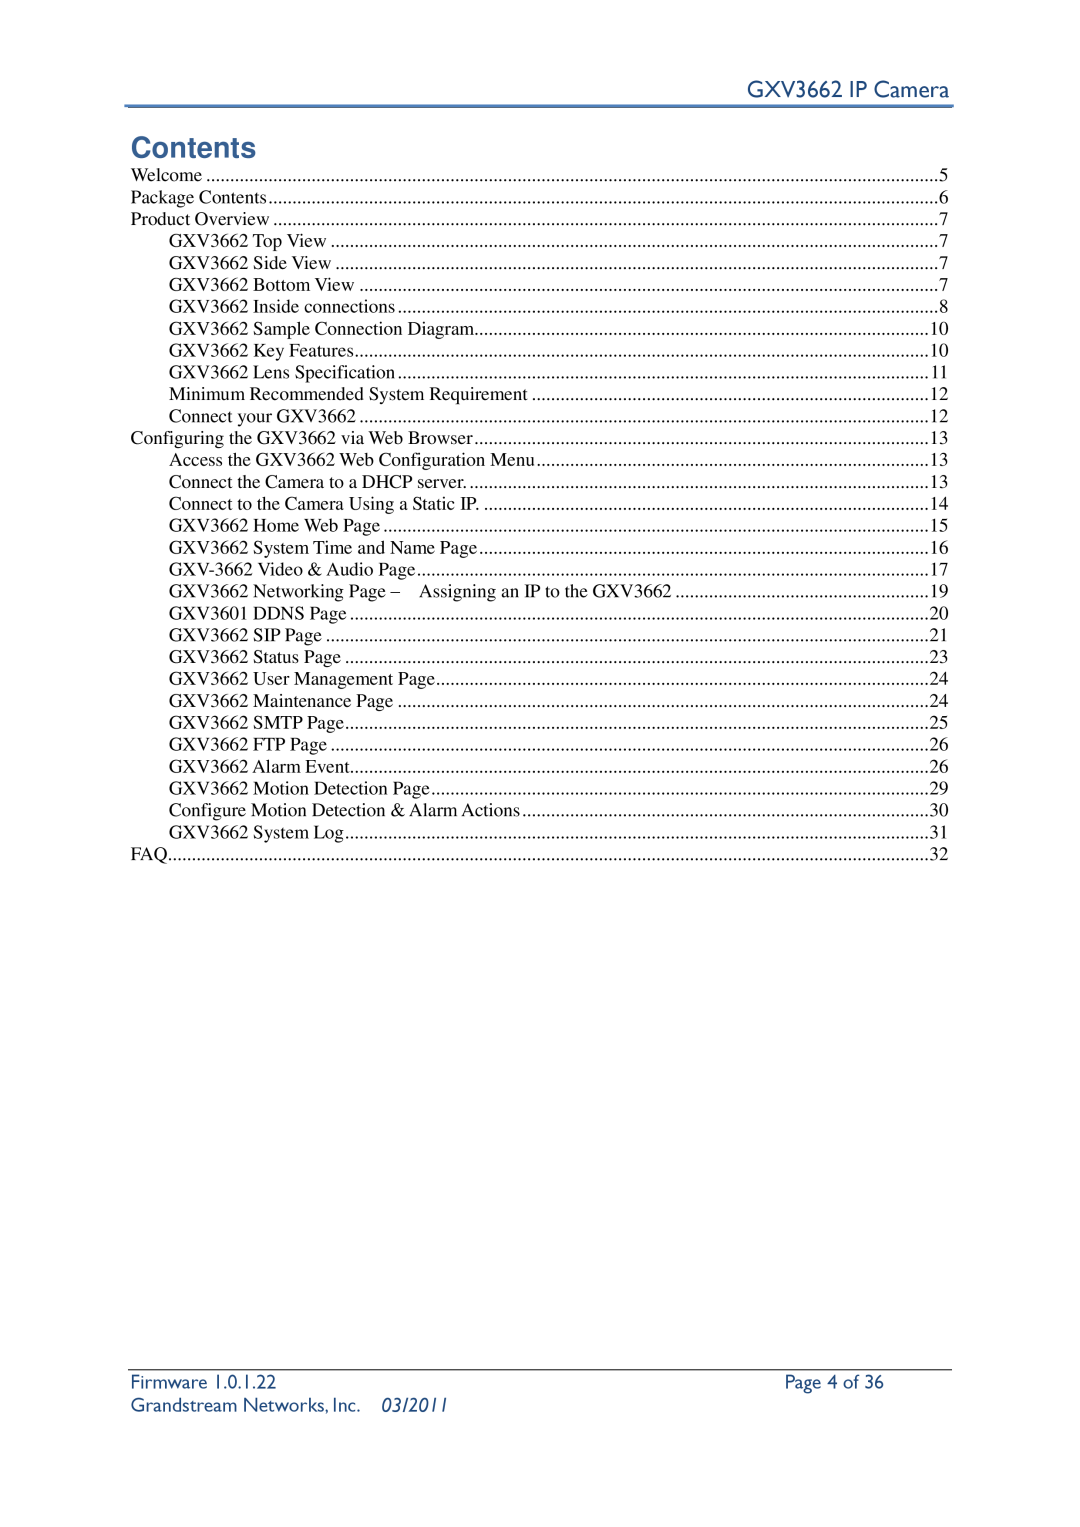 Grandstream Networks user manual Contents, Page 4 of, GXV3662 IP Camera, Firmware, Grandstream Networks, Inc, 03/2011 